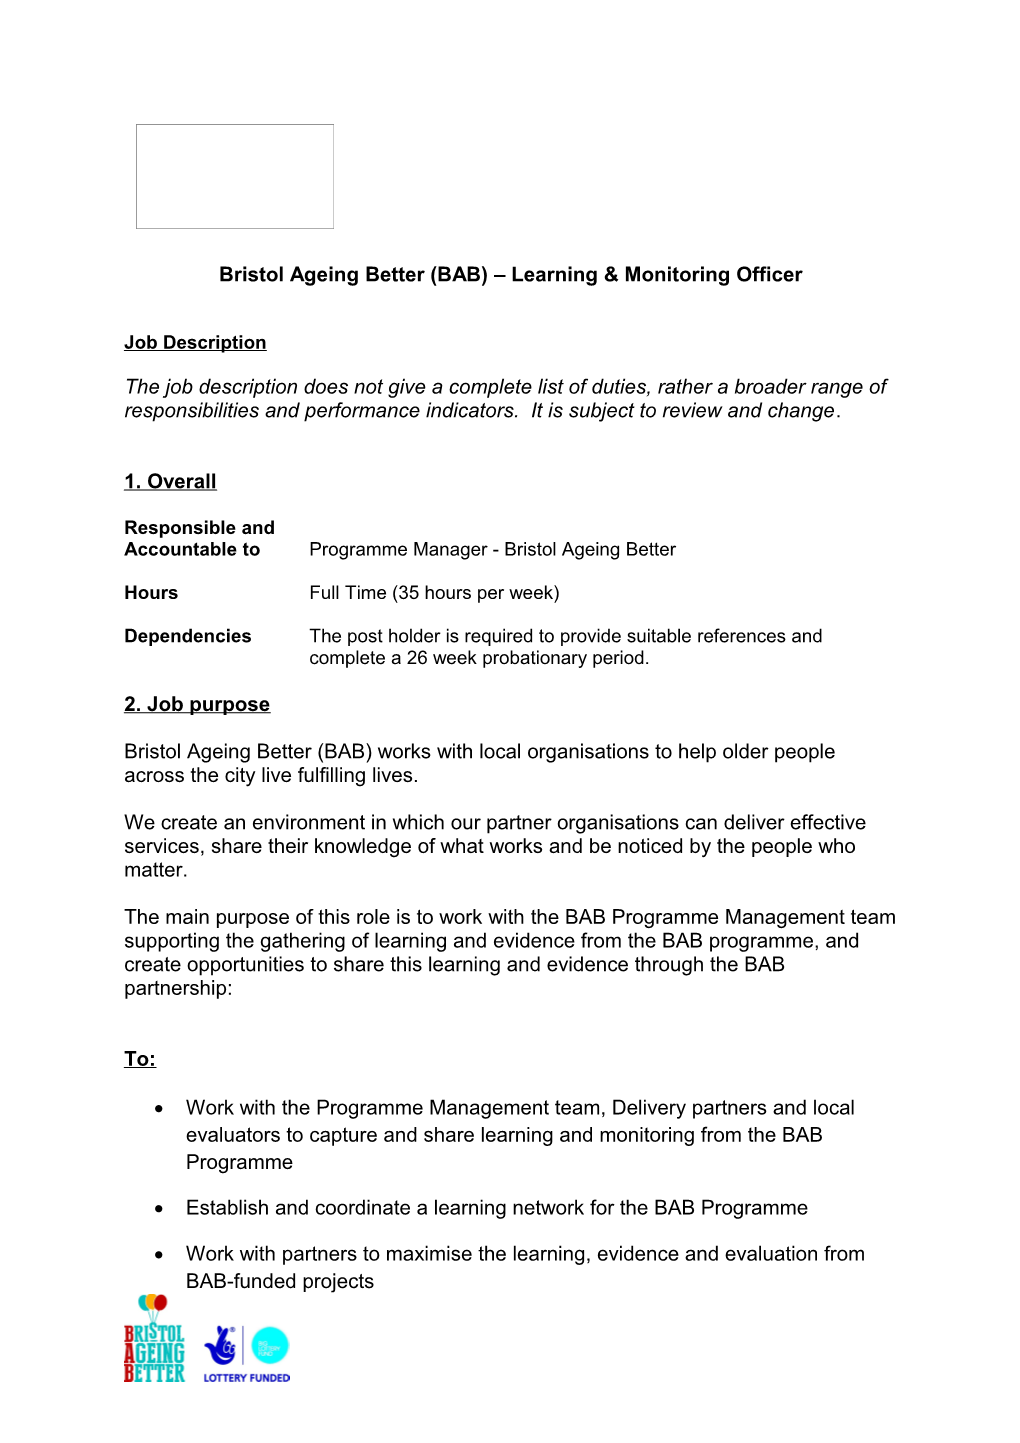 Bristol Ageing Better (BAB) Learning & Monitoring Officer